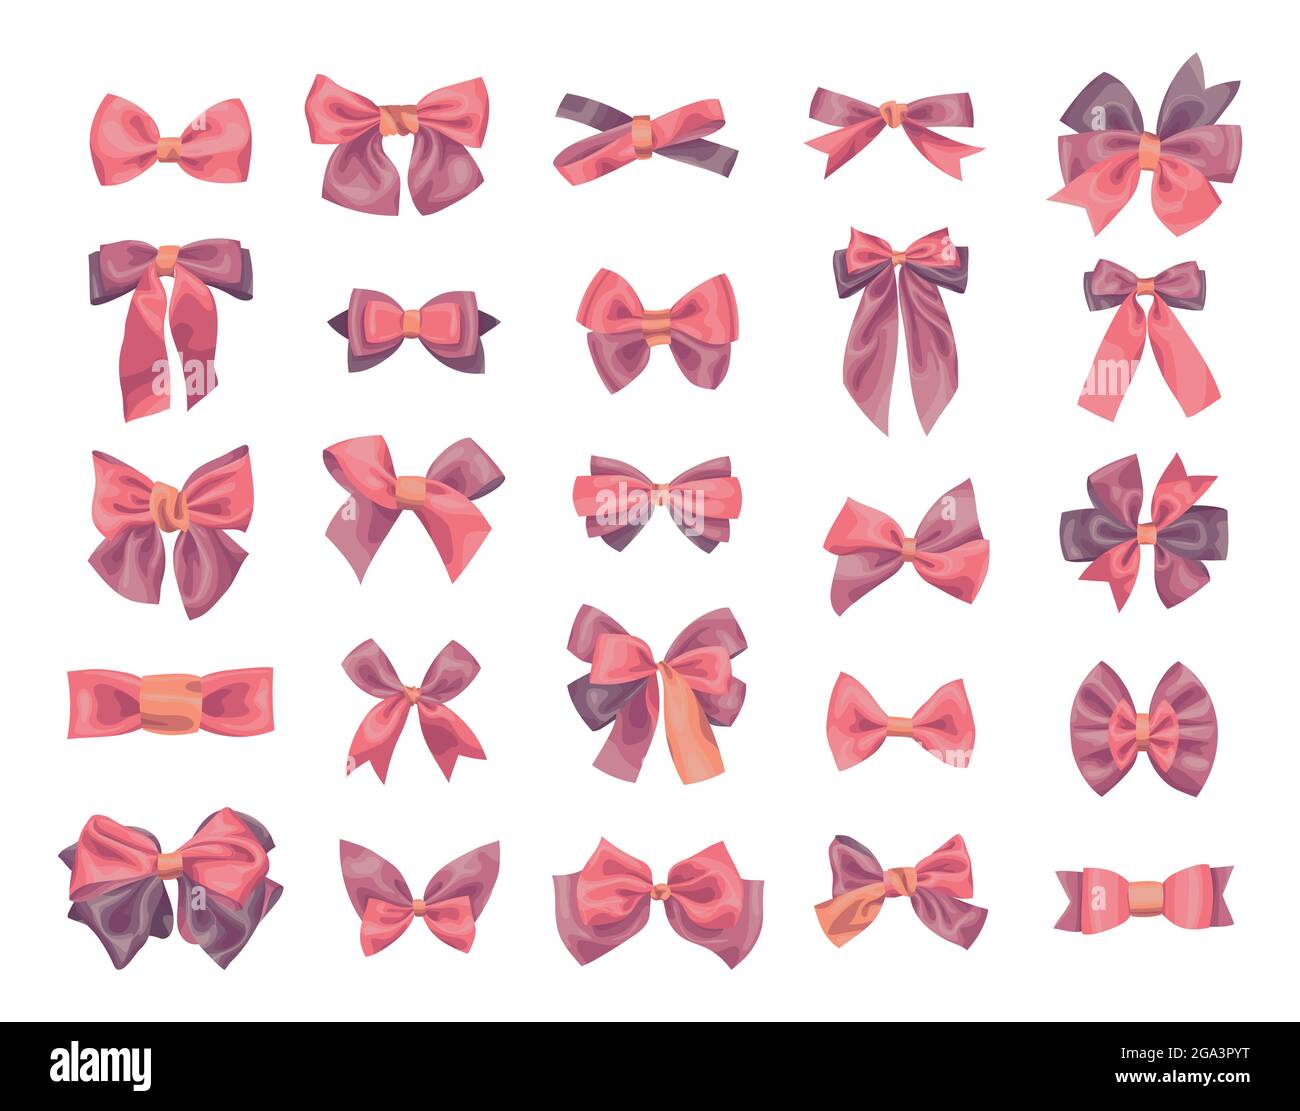 How To Draw Bows | The Anime Palette